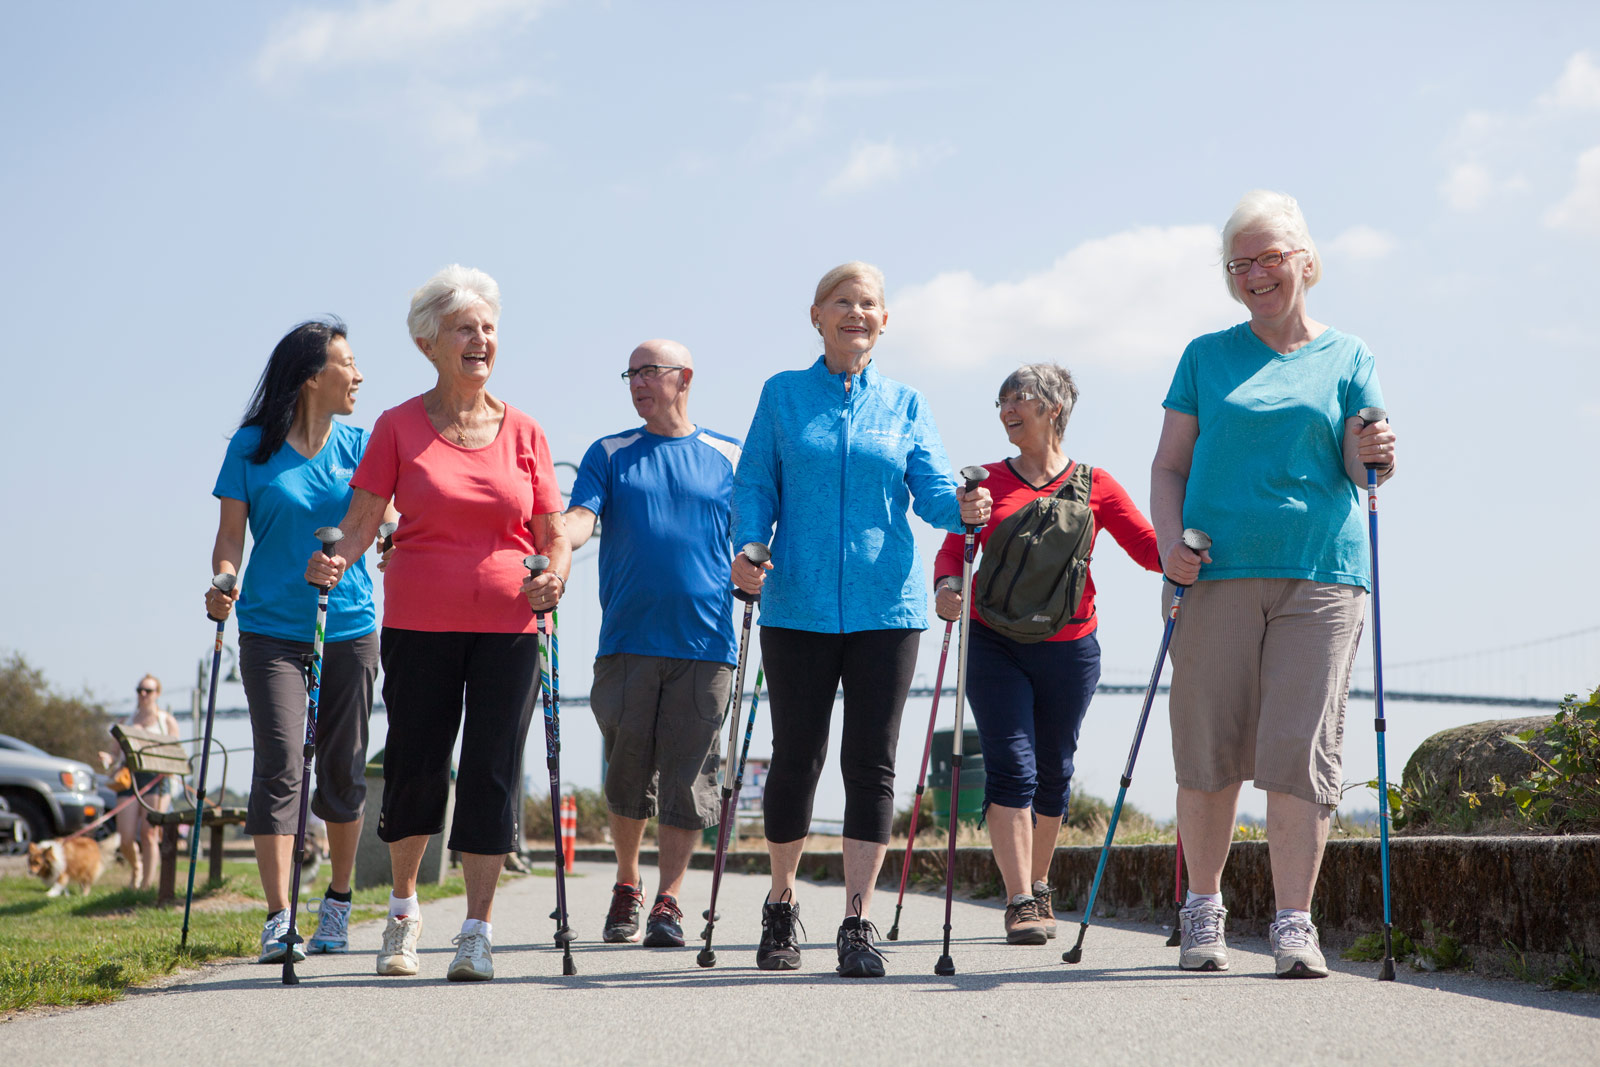 Effects of Nordic walking training on quality of life, balance and functional mobility in elderly: A randomized clinical trial